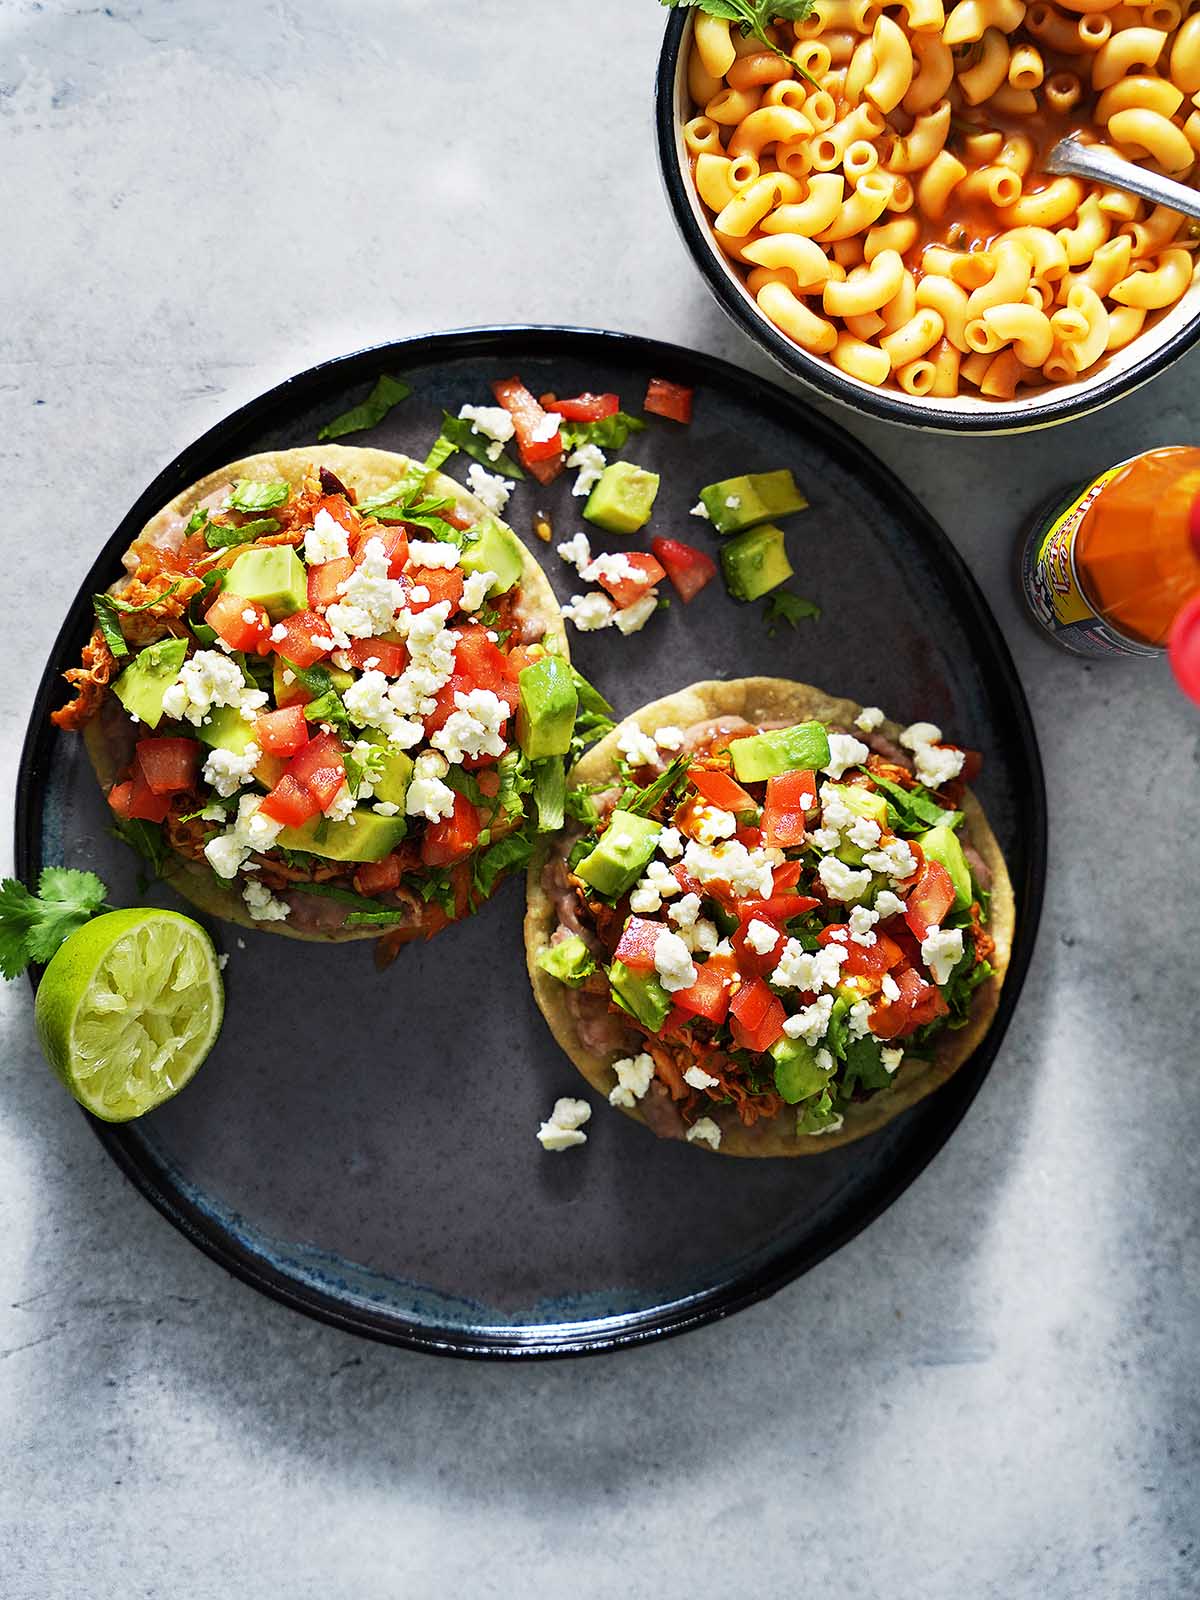 Two chicken tostadas on a plate topped with beans, shredded chicken, tomatoes, avocados and lettuce.